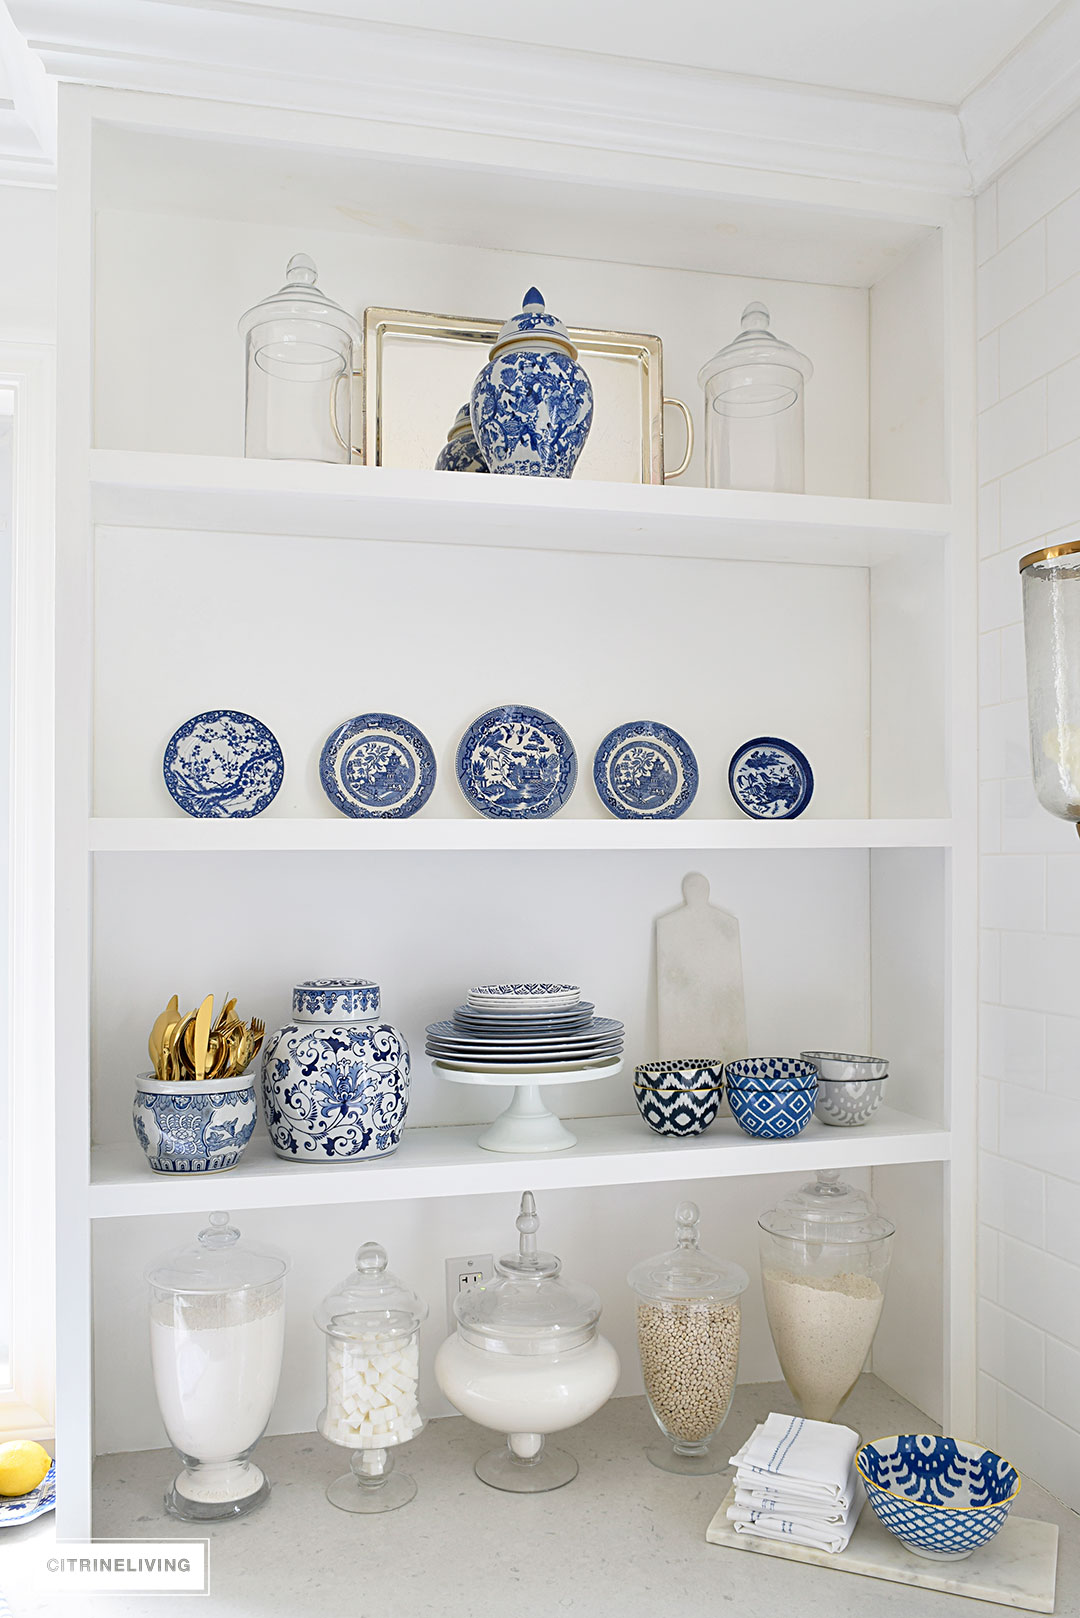 A gorgeous display of blue and white accessories and dishware on open shelving is sophisticated and elegant. 